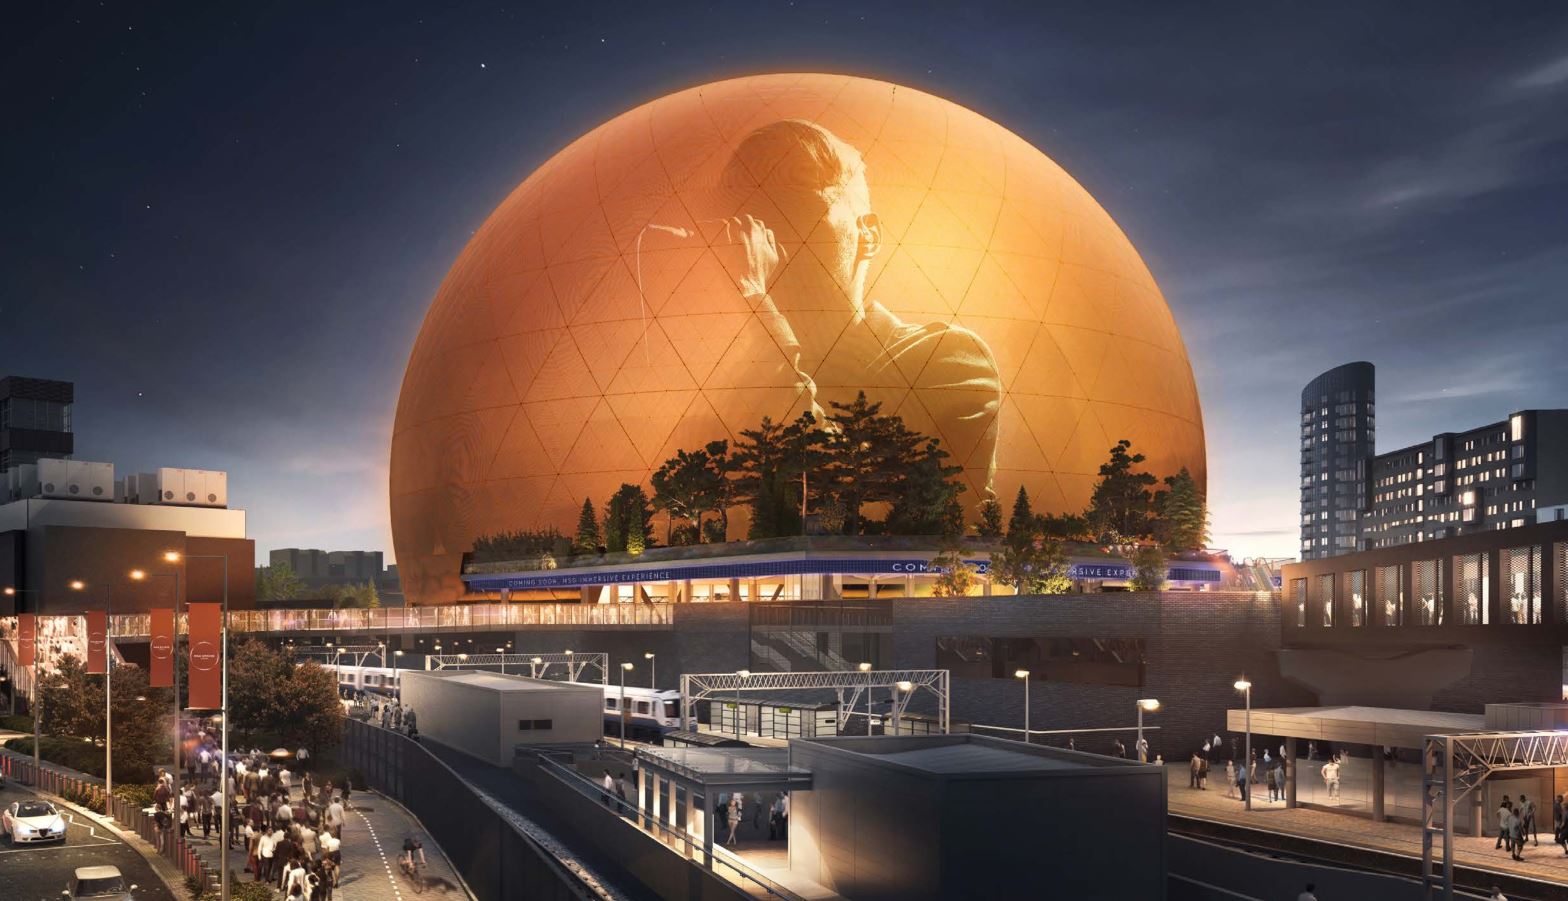 Sphere and Loathing in Stratford – Mayor rejects plans for a giant glowing globe